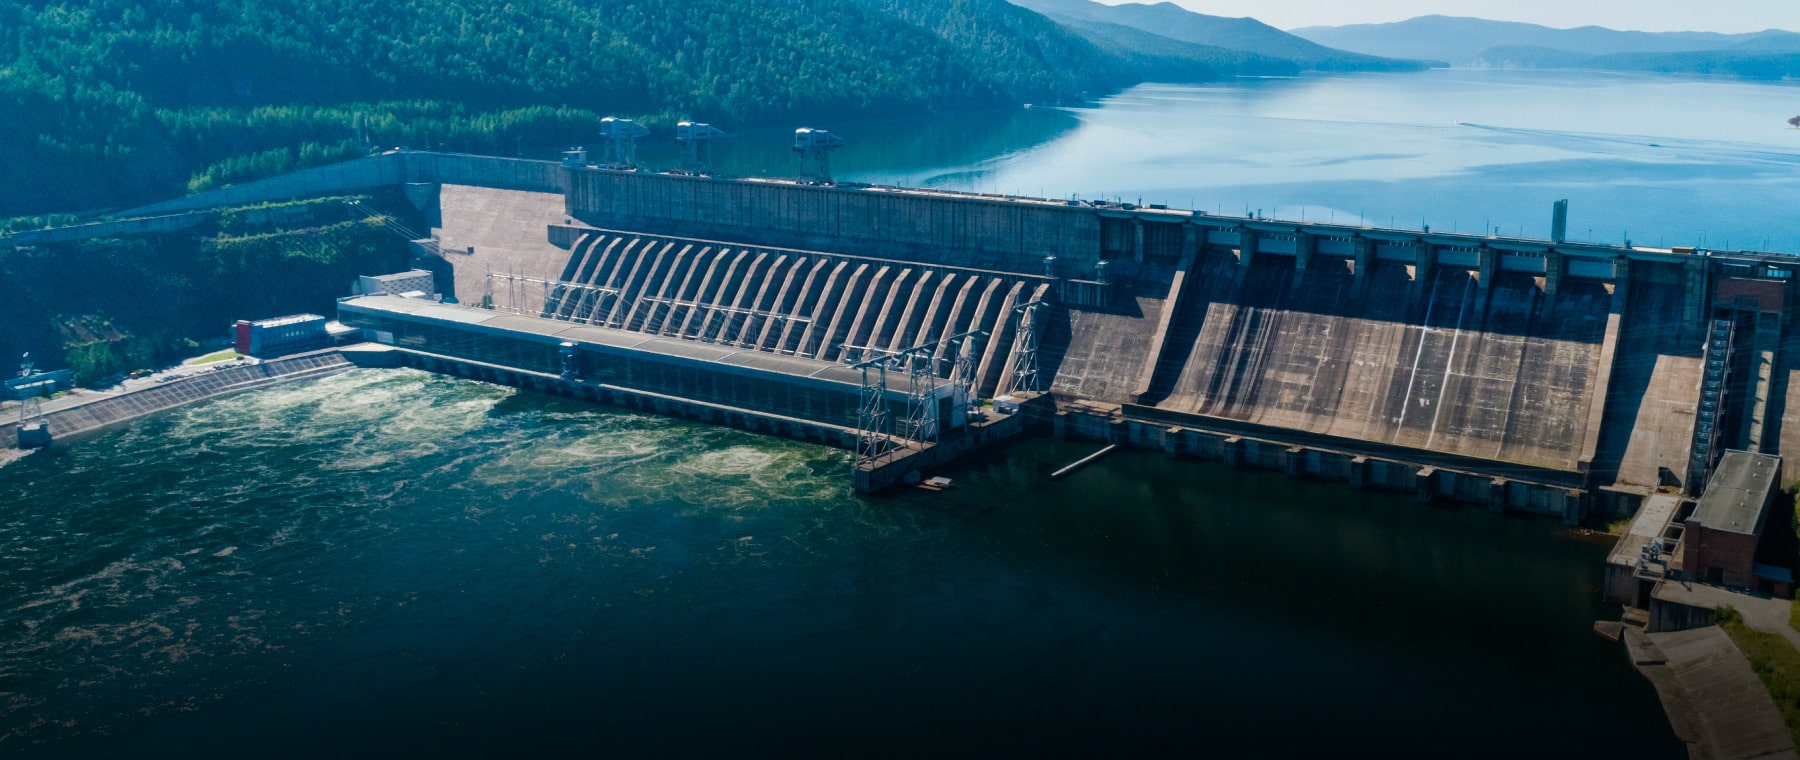 The future of hydro power generation